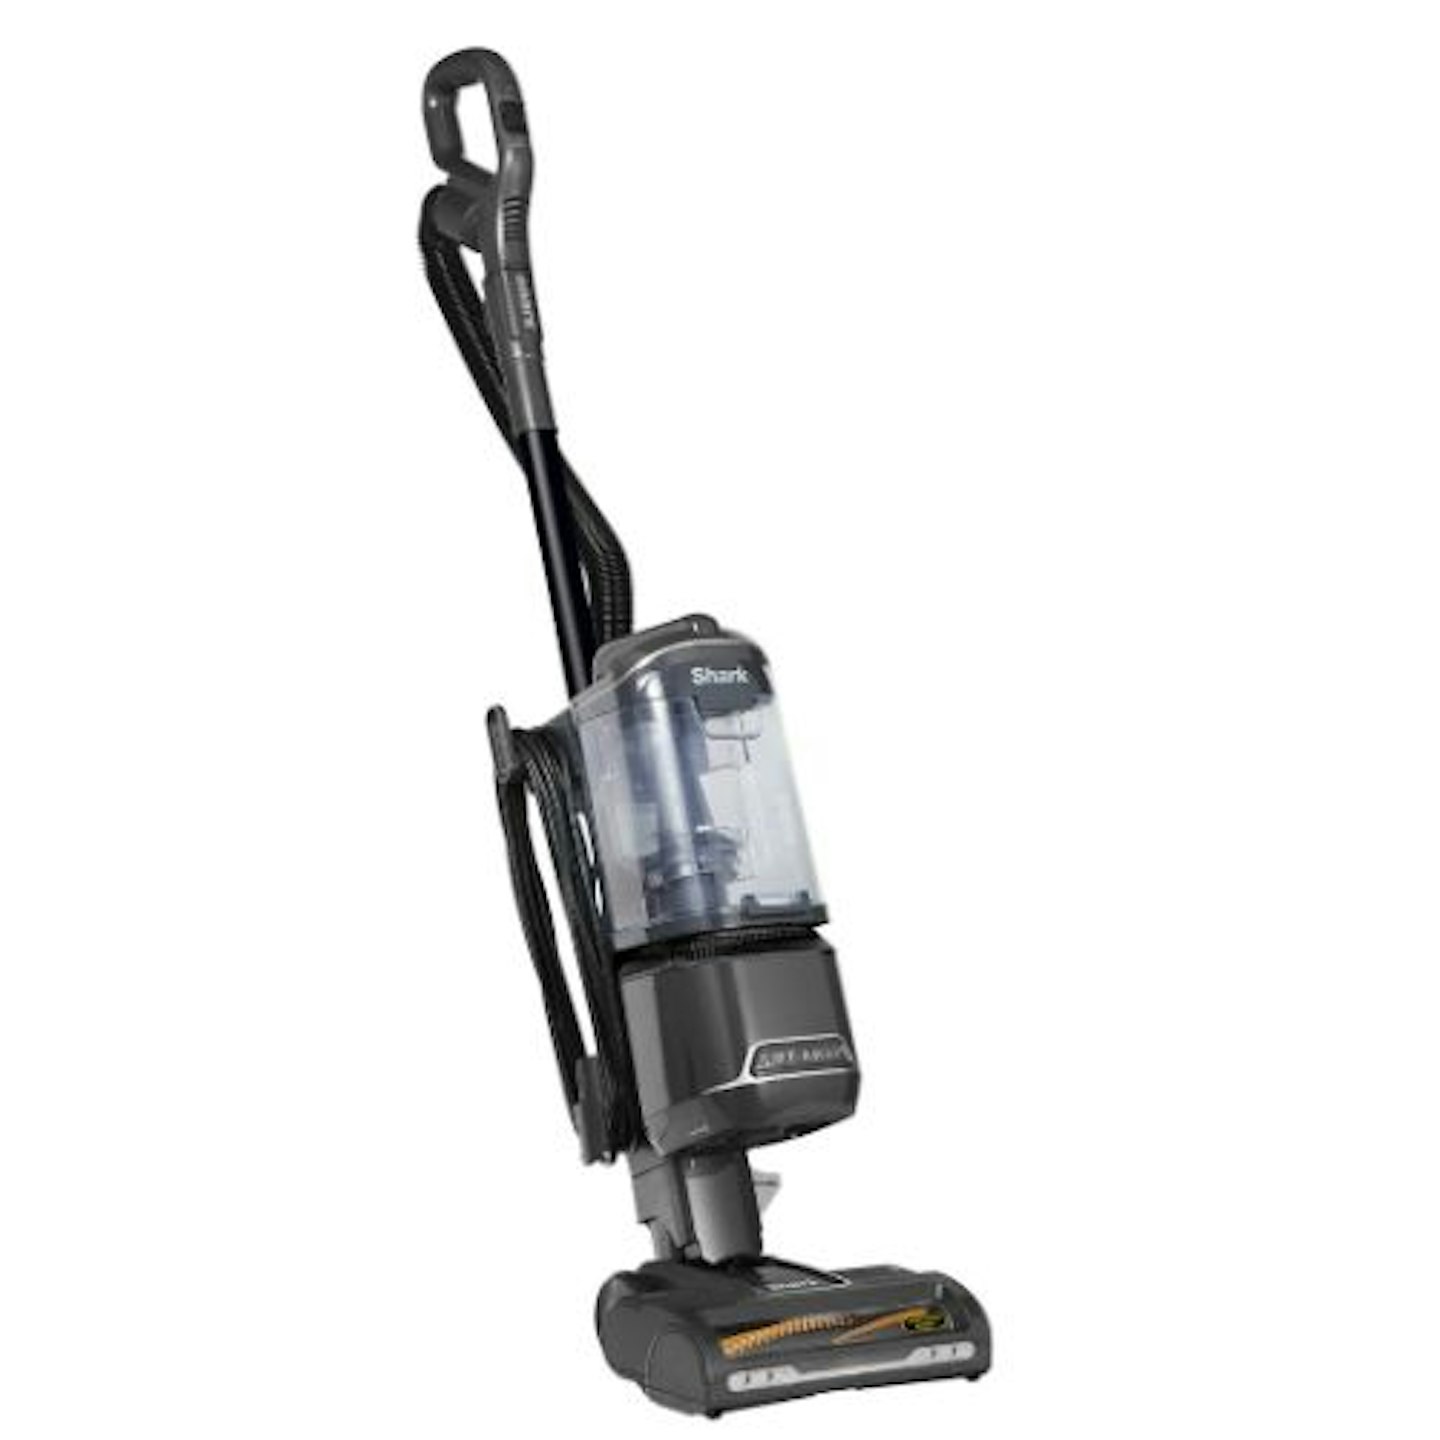 Shark Deluxe Black Anti Hair Wrap Upright Vacuum Cleaner with Lift-Away, Pet Model NZ690UKTDB